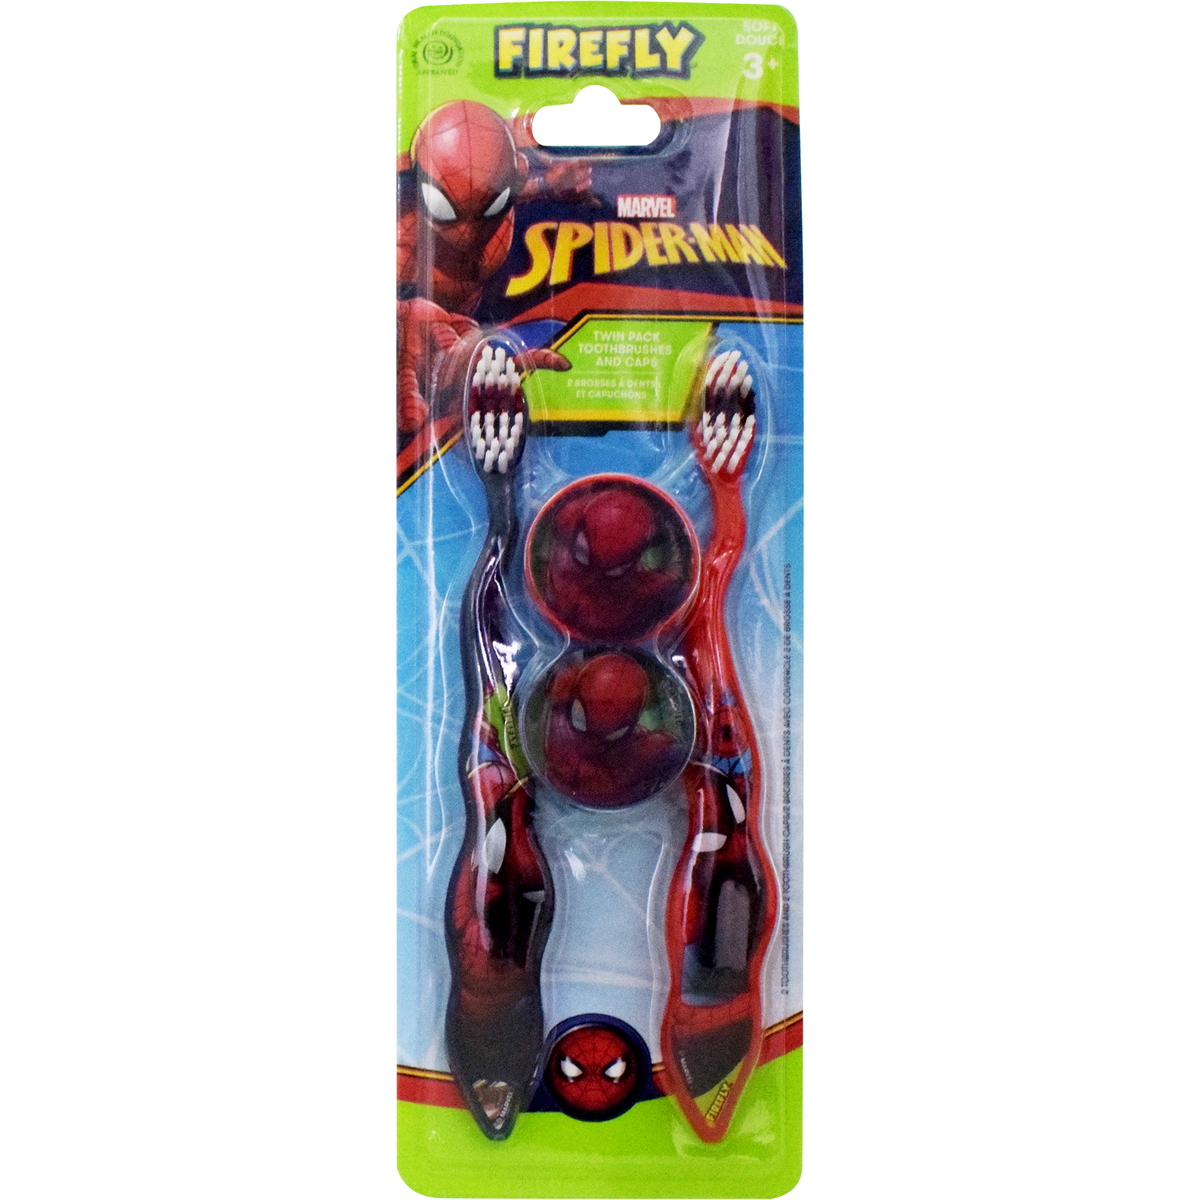 Firefly Marvel Spider Man Toothbrush Soft Assorted 2 pcs